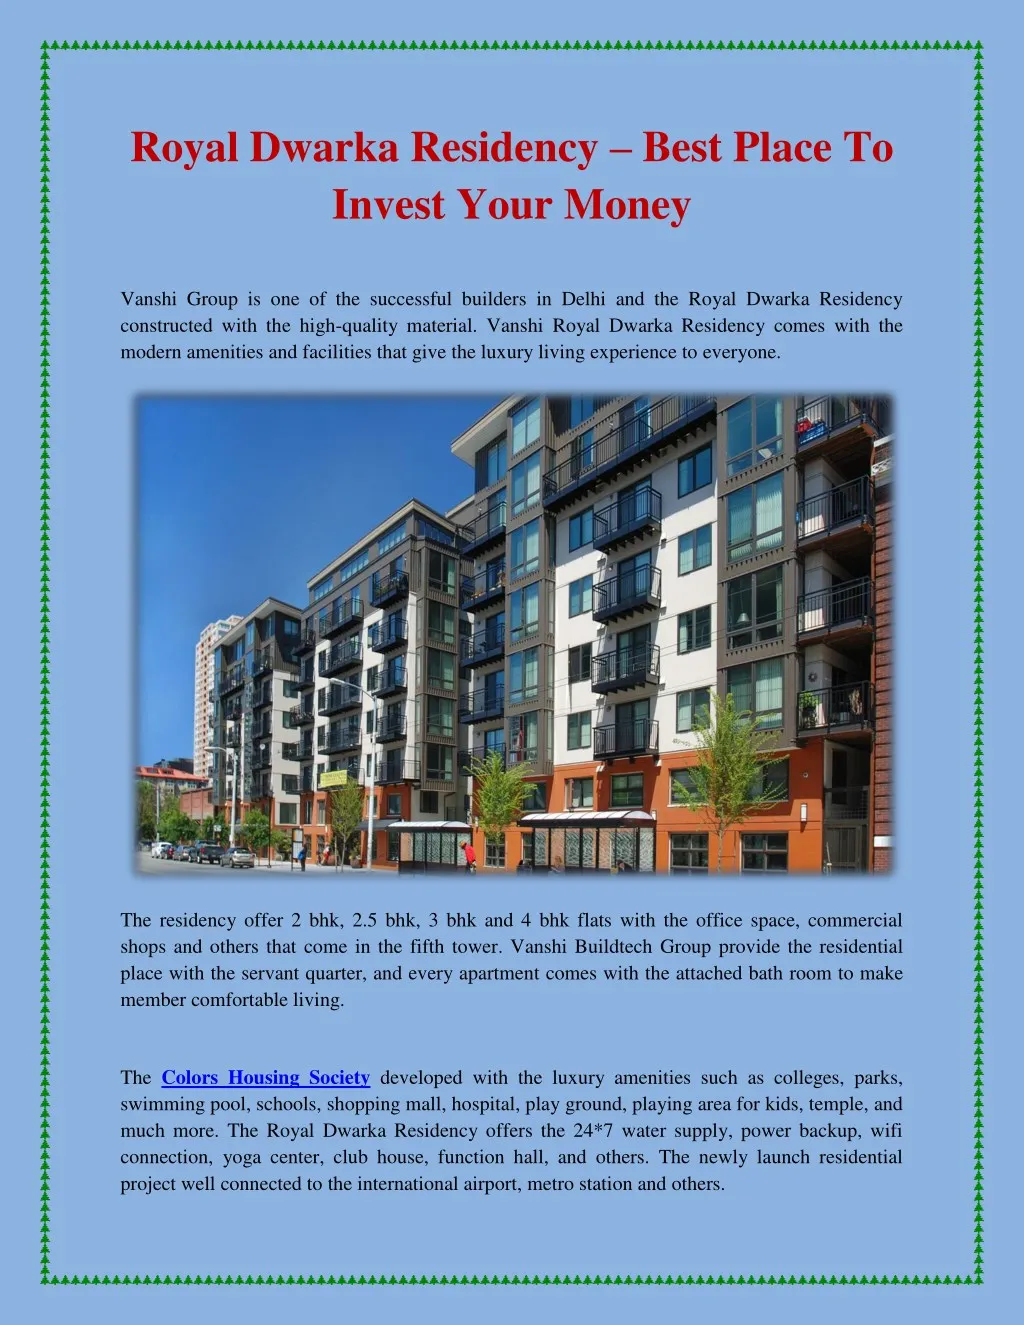 royal dwarka residency best place to invest your